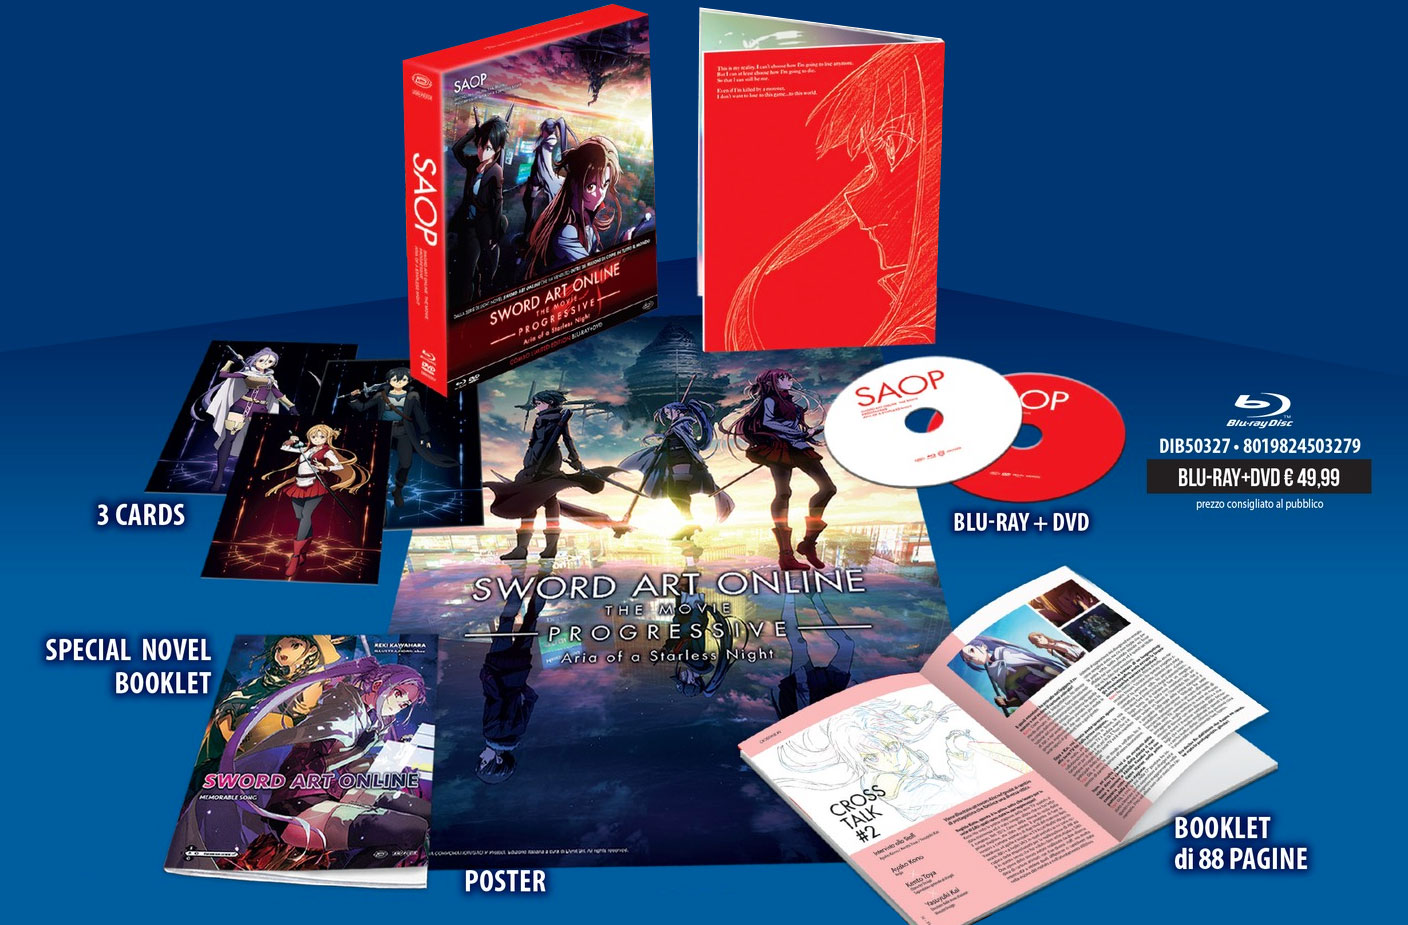 Contents of the home video edition of SAO Progressive: Aria of a Starless Night